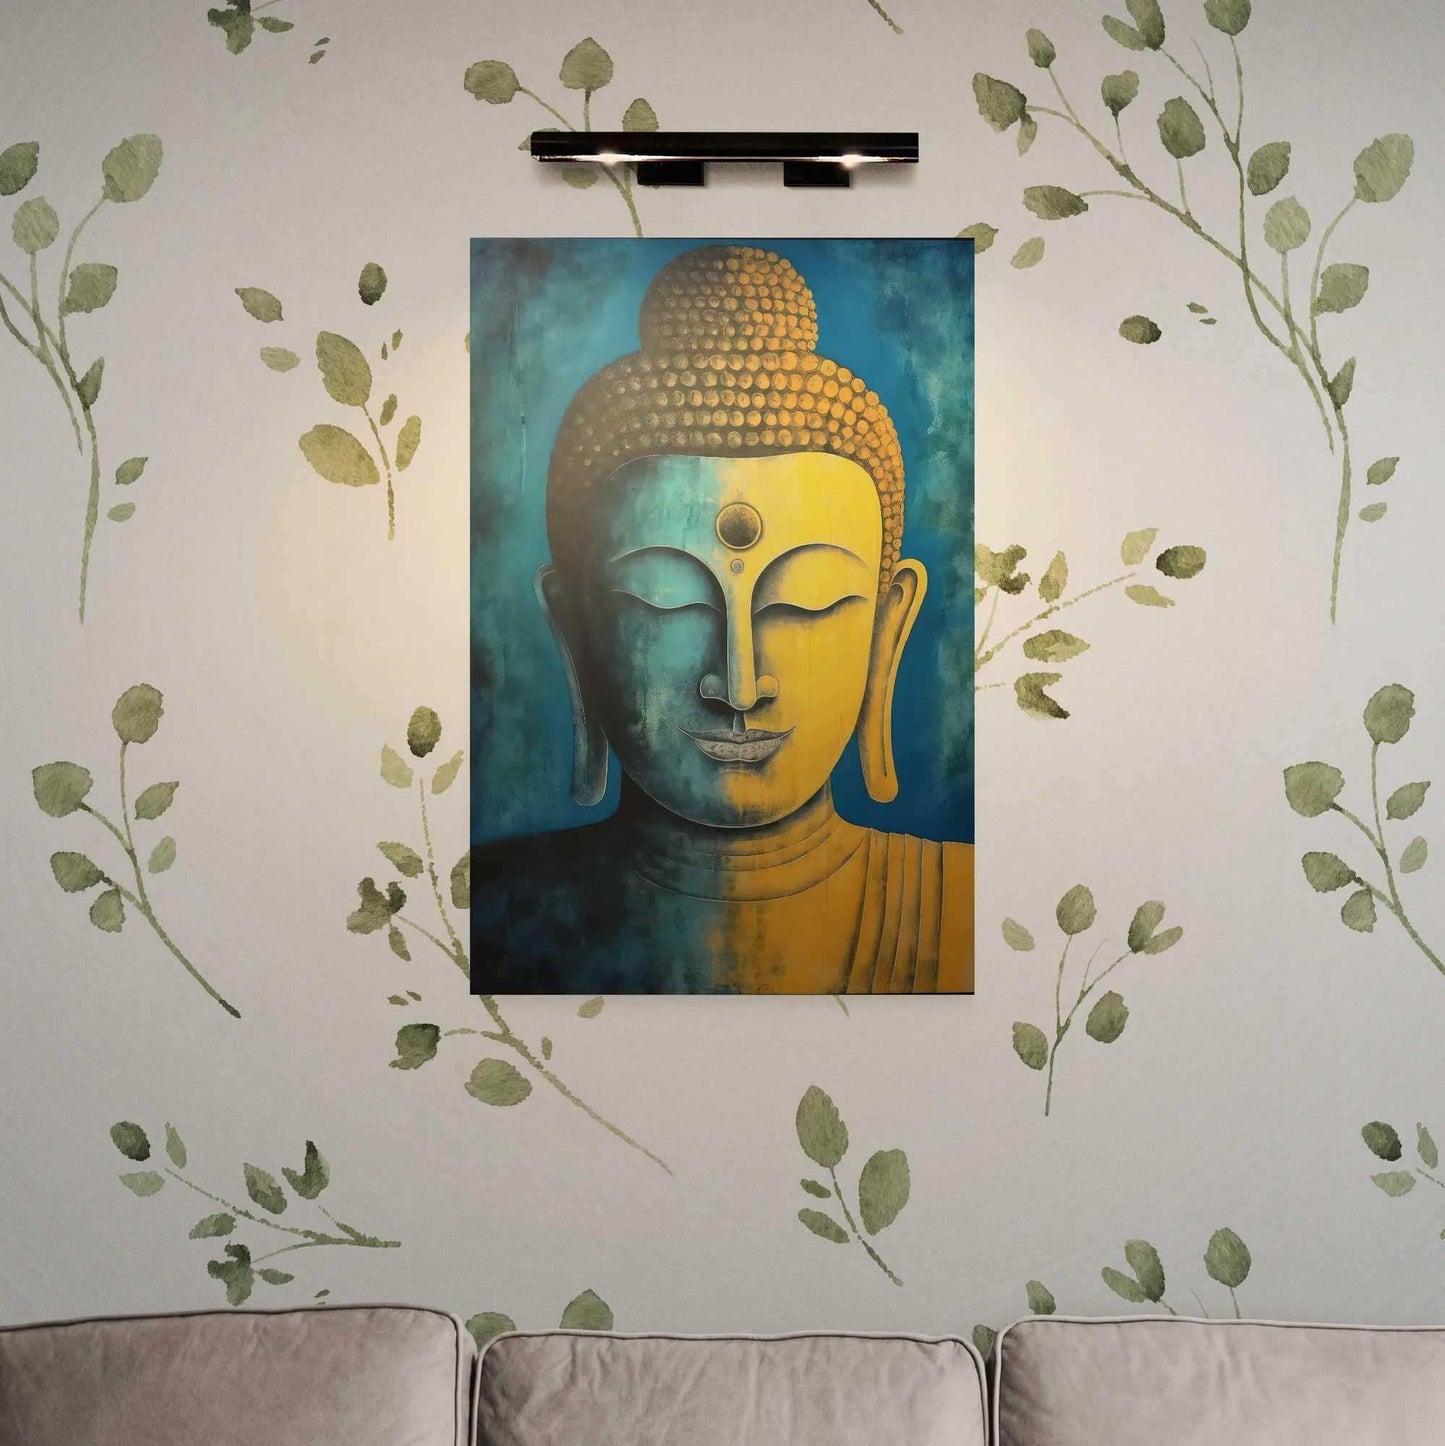 Blue and gold Buddha painting provides a calming presence over a beige sofa, enhanced by the leaf-patterned wallpaper in a living area.